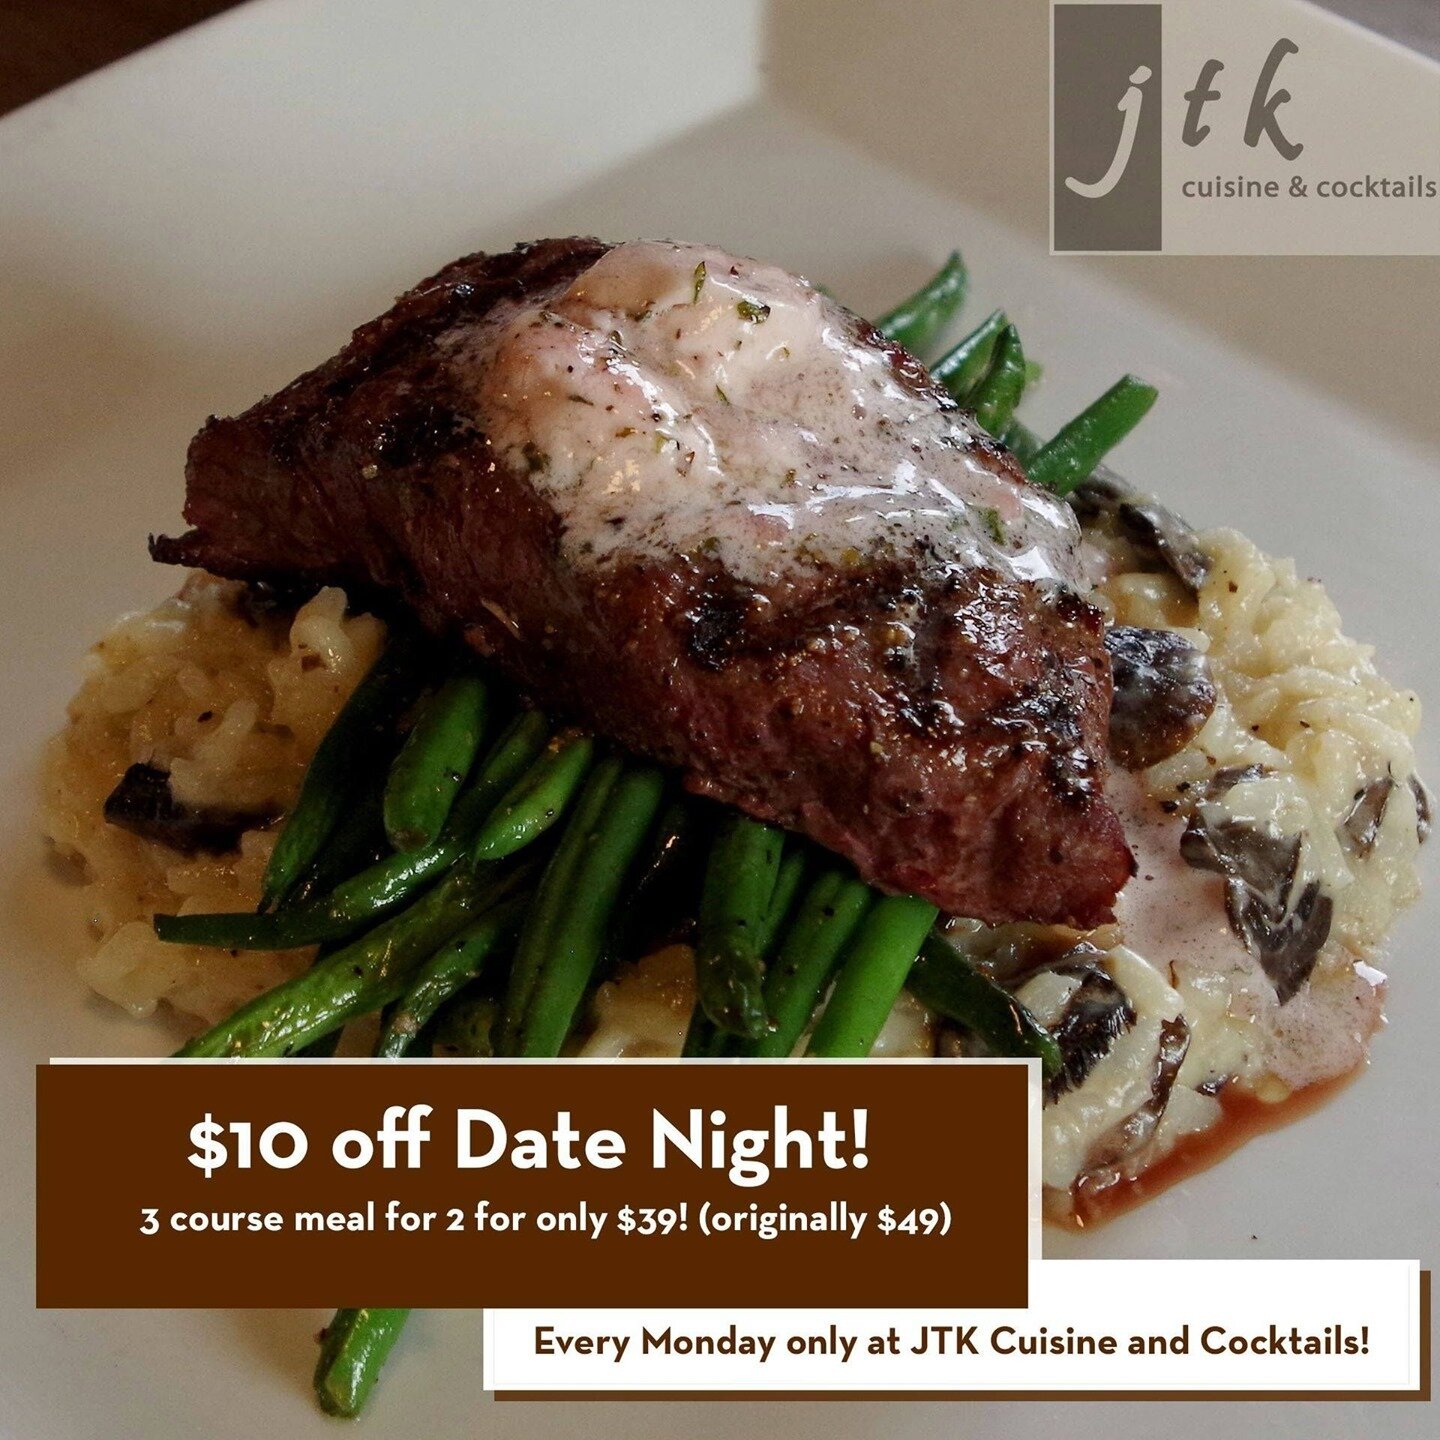 It's never too early in the week for a Date Night!⠀⠀⠀⠀
⠀⠀⠀⠀⠀⠀
Give us a call at 402.435.0161 to make your reservation or to place an order for pick up!⠀⠀⠀
⠀⠀⠀⠀⠀
#jtklnk #downtownlincoln #mylnk #lincolnhaymarket #haymarketlnk #restaurant #steak #flati